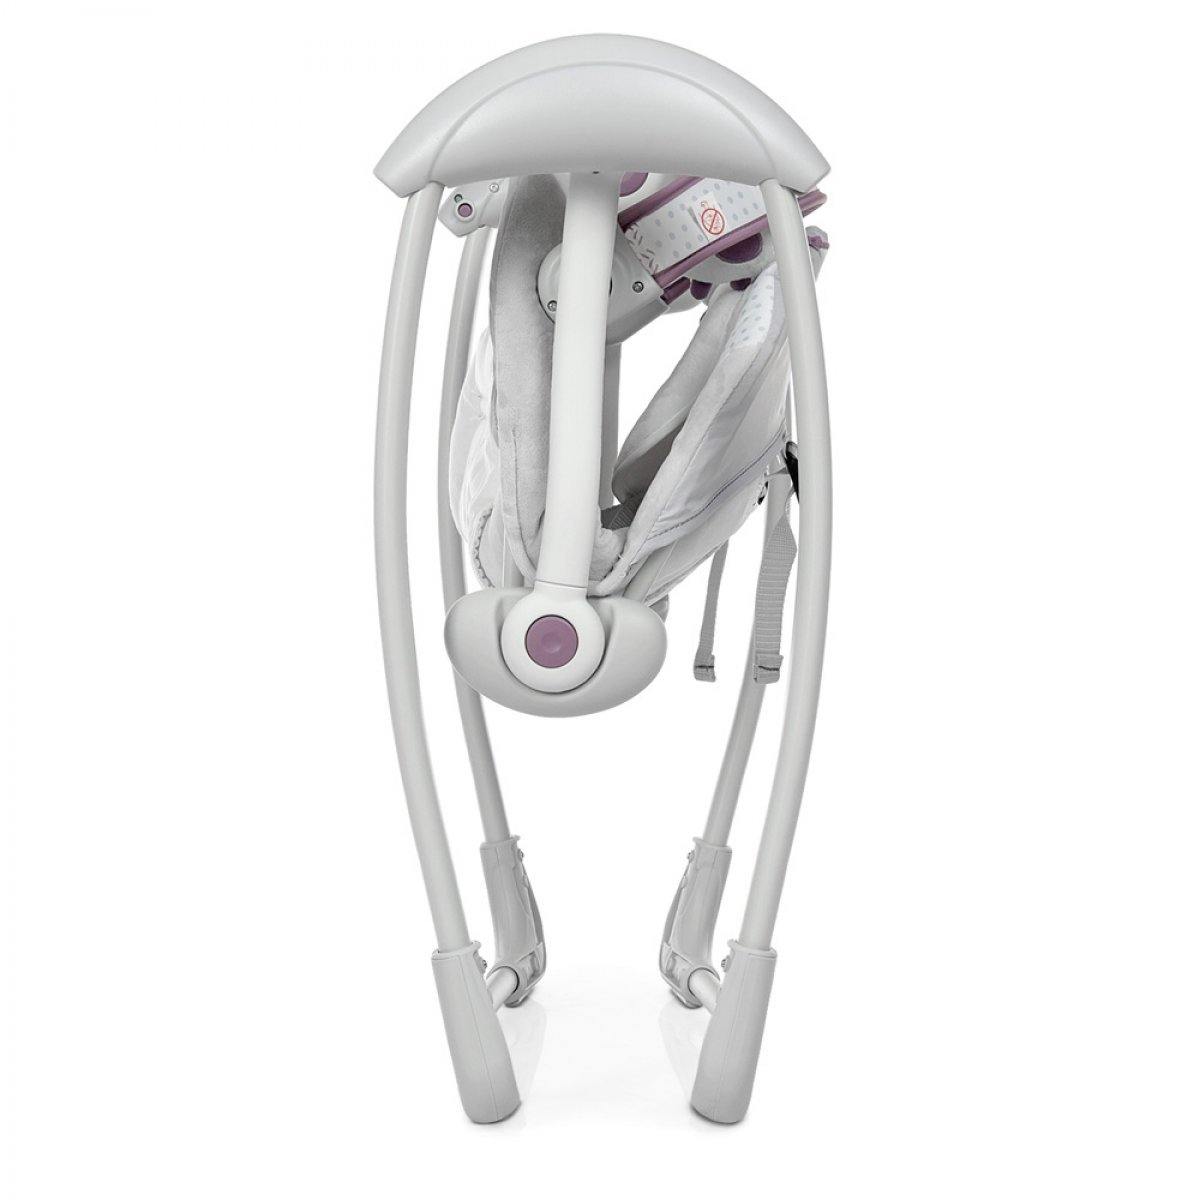 Mastela Swing Deluxe and Portable White - Little Angel Baby Store